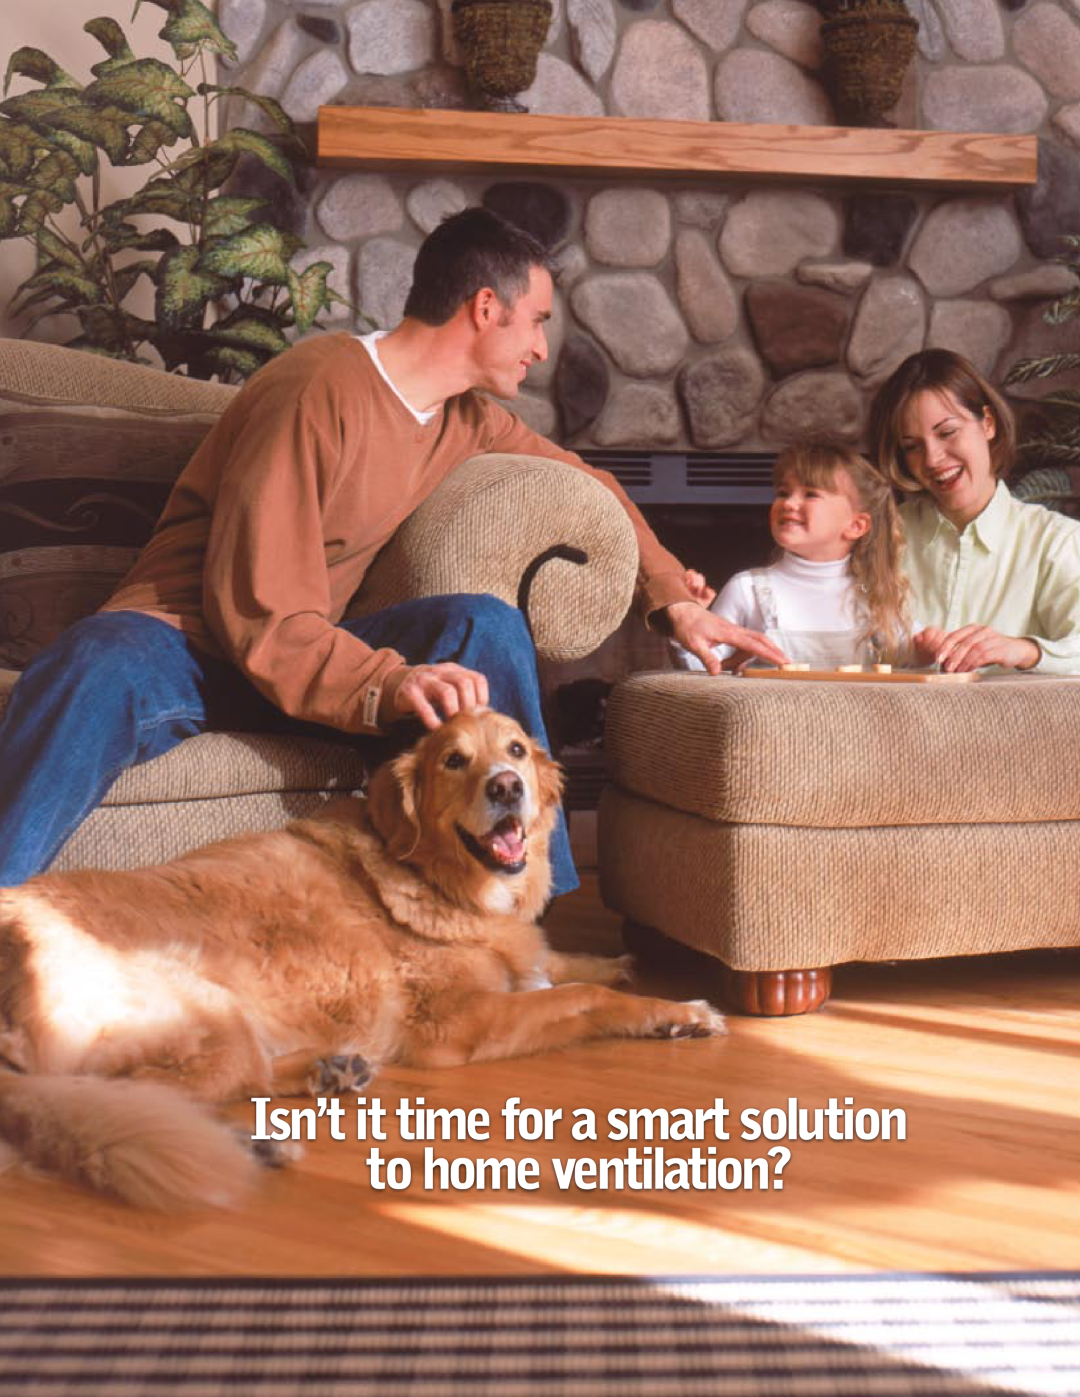 Broan SmartSense manual to home ventilation?, Isn’t it time for a smart solution 